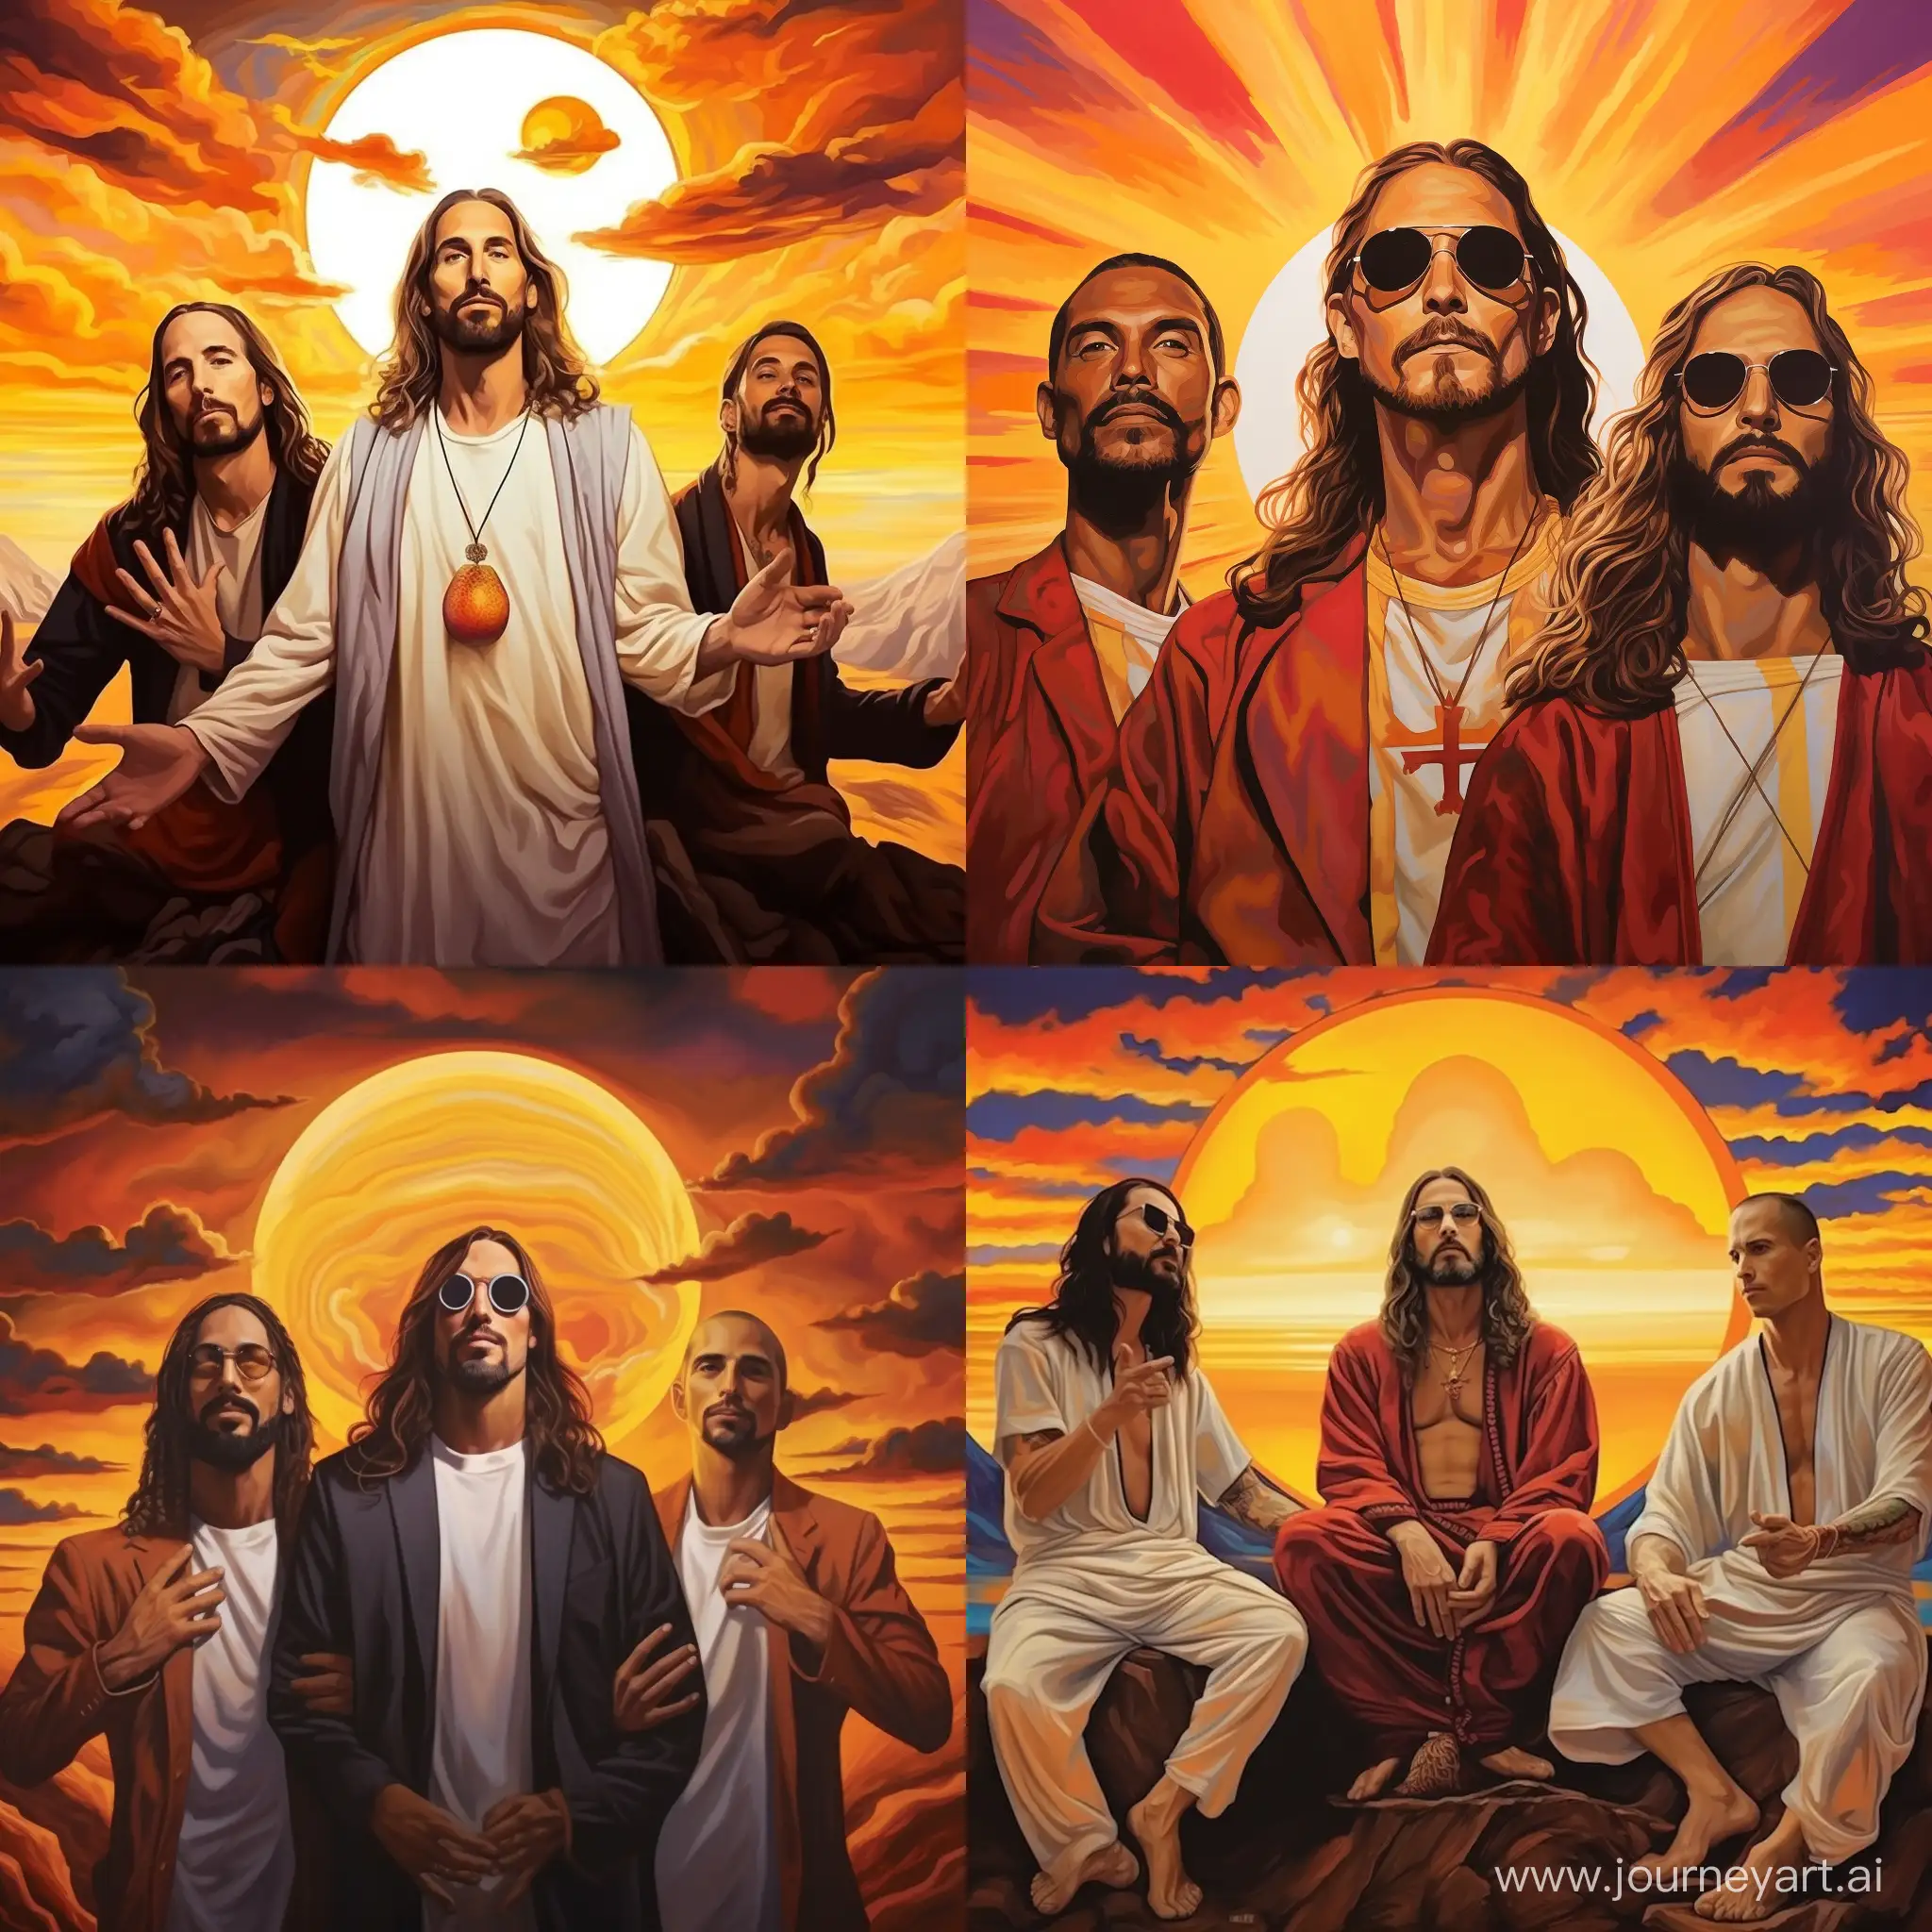 Iconic-Trio-in-Surreal-California-Sunset-LeBron-Jesus-and-Steve-Jobs-in-Dali-Style